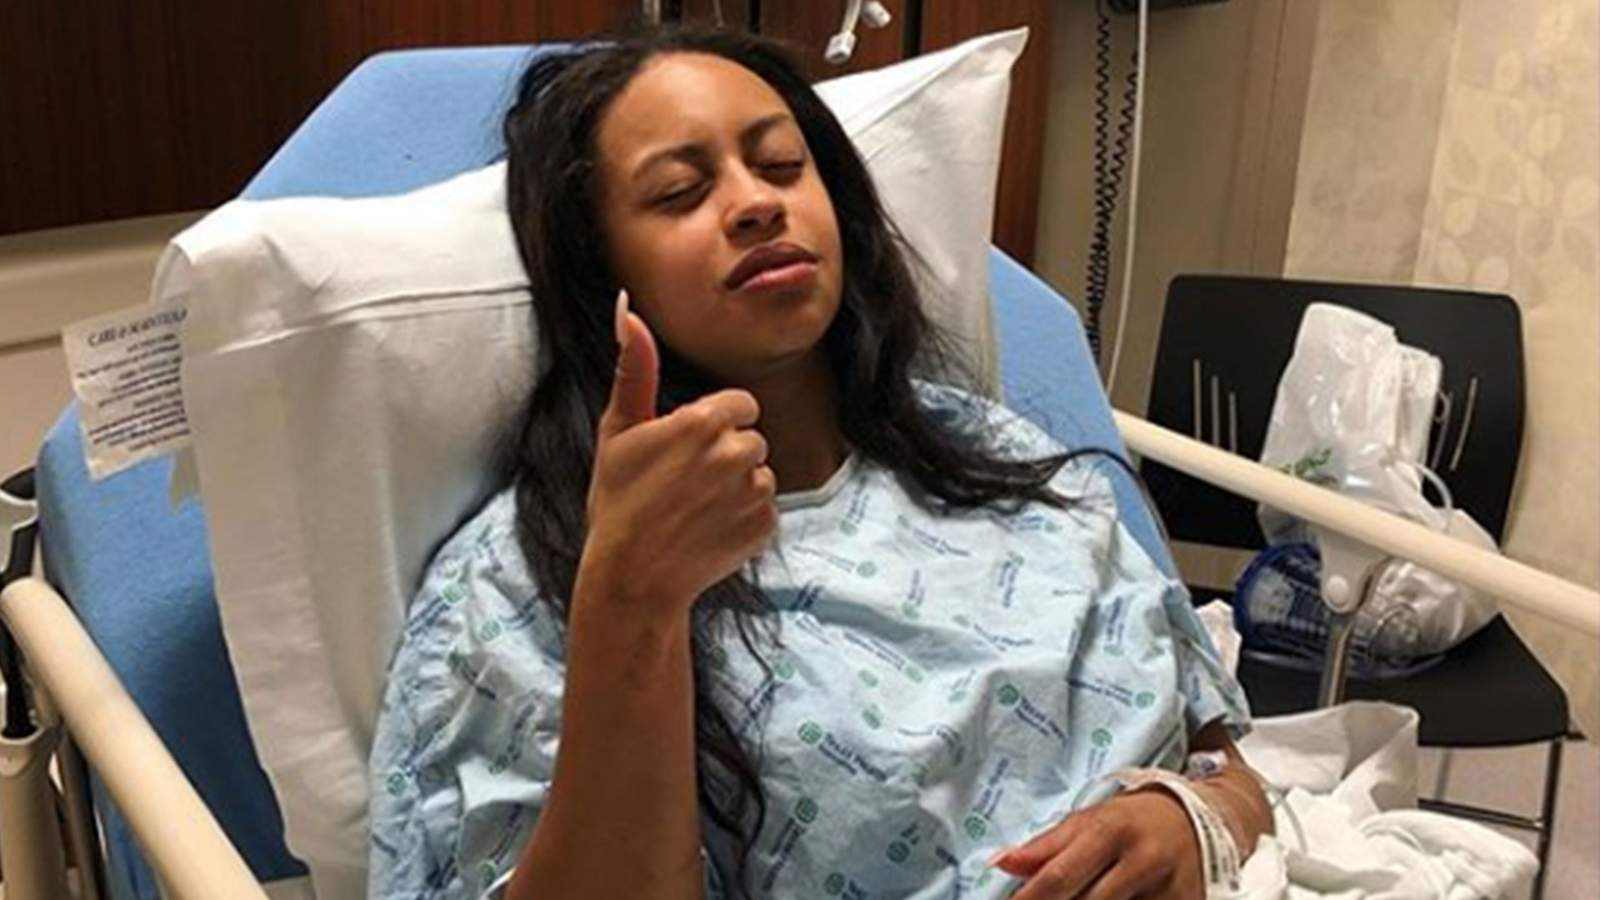 Texas stripper who fell 15 feet from pole had jaw wired shut in successful surgery